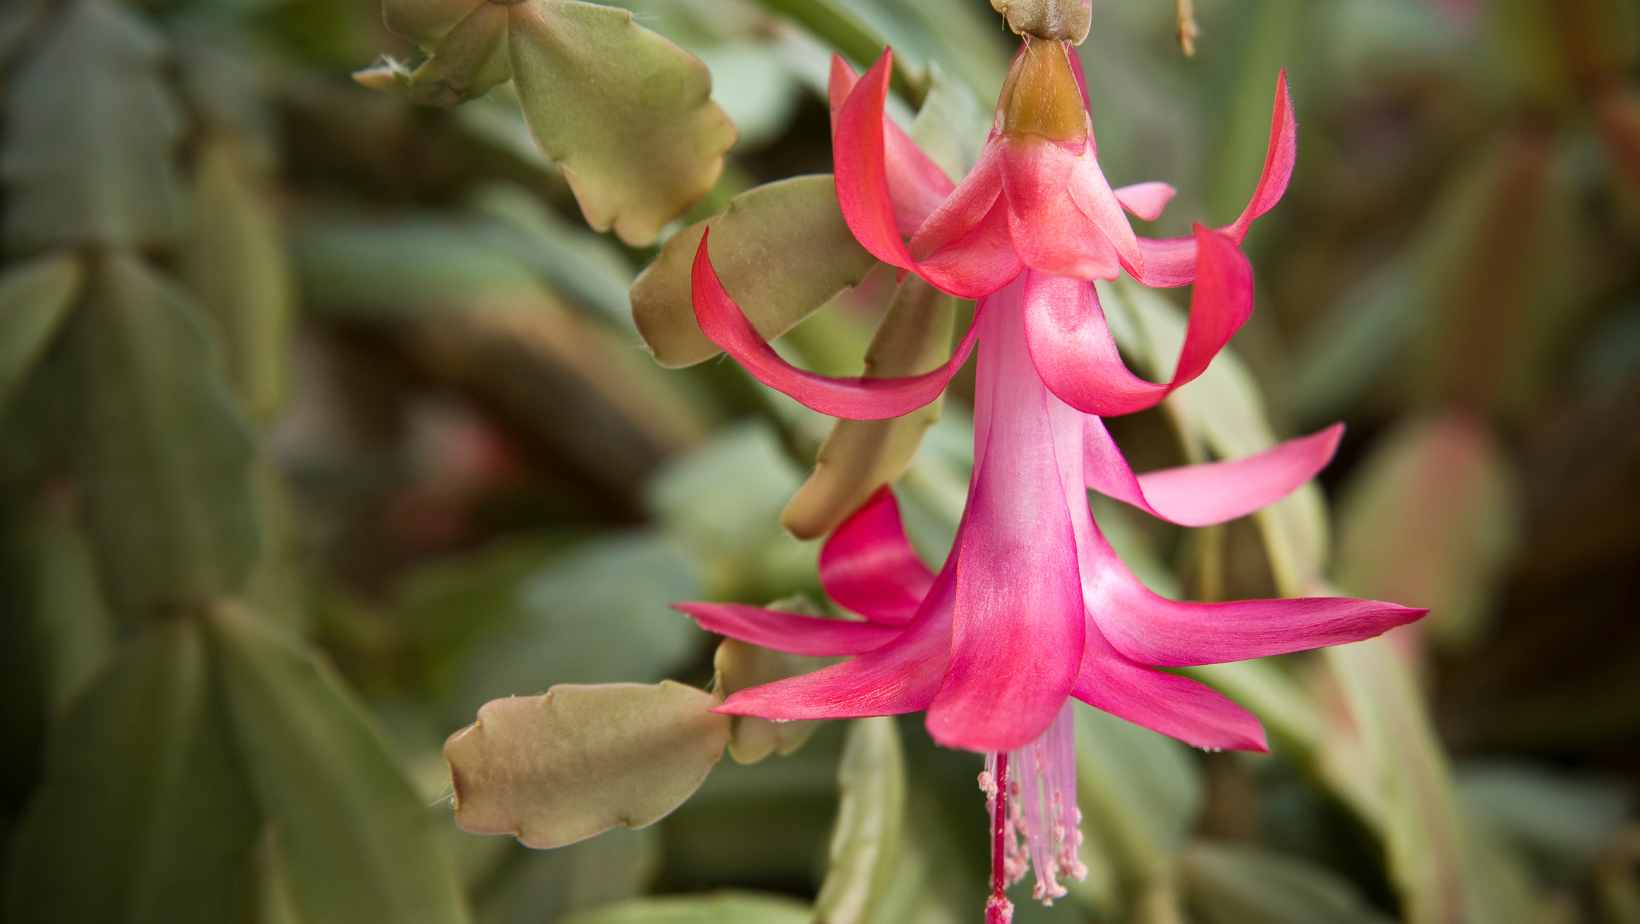 The Christmas Cactus is a Symbol of The Holiday Season.